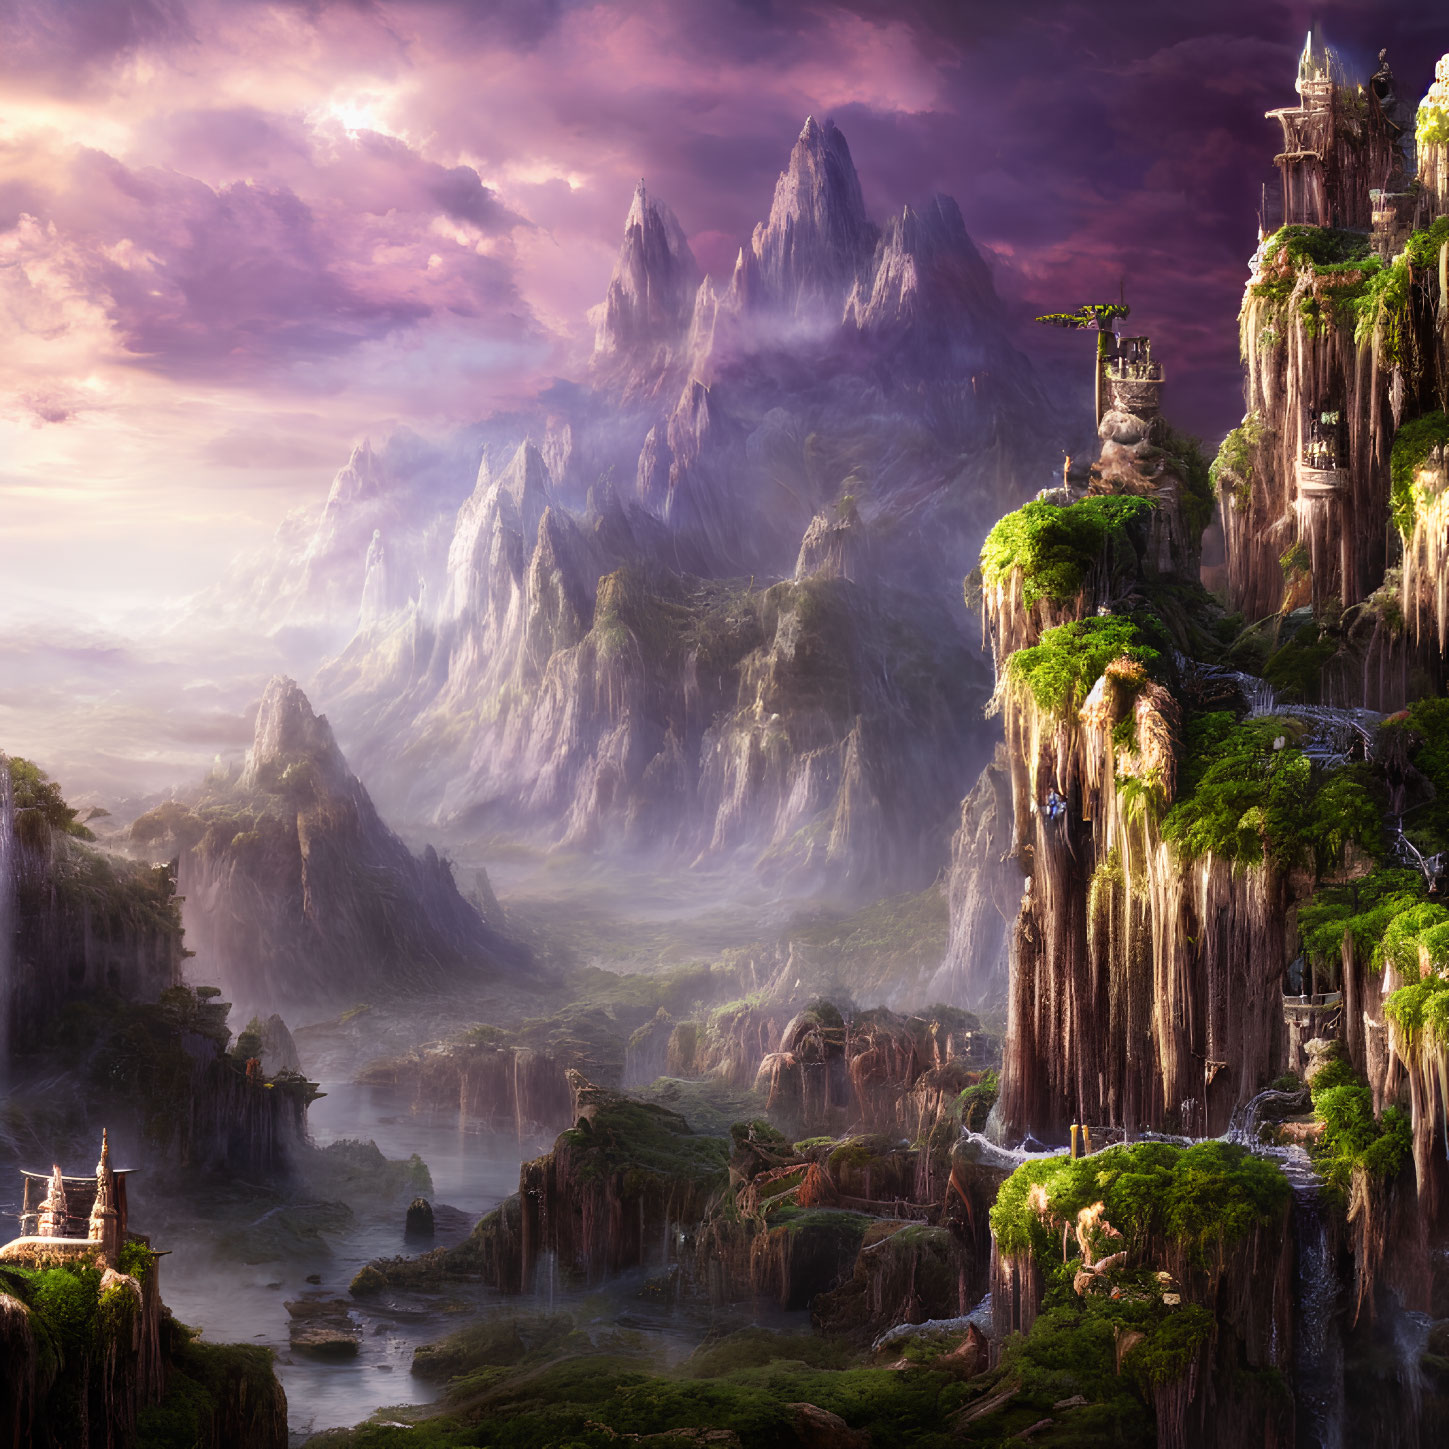 Mystical landscape with mountains, waterfalls, greenery, and castle-like structures